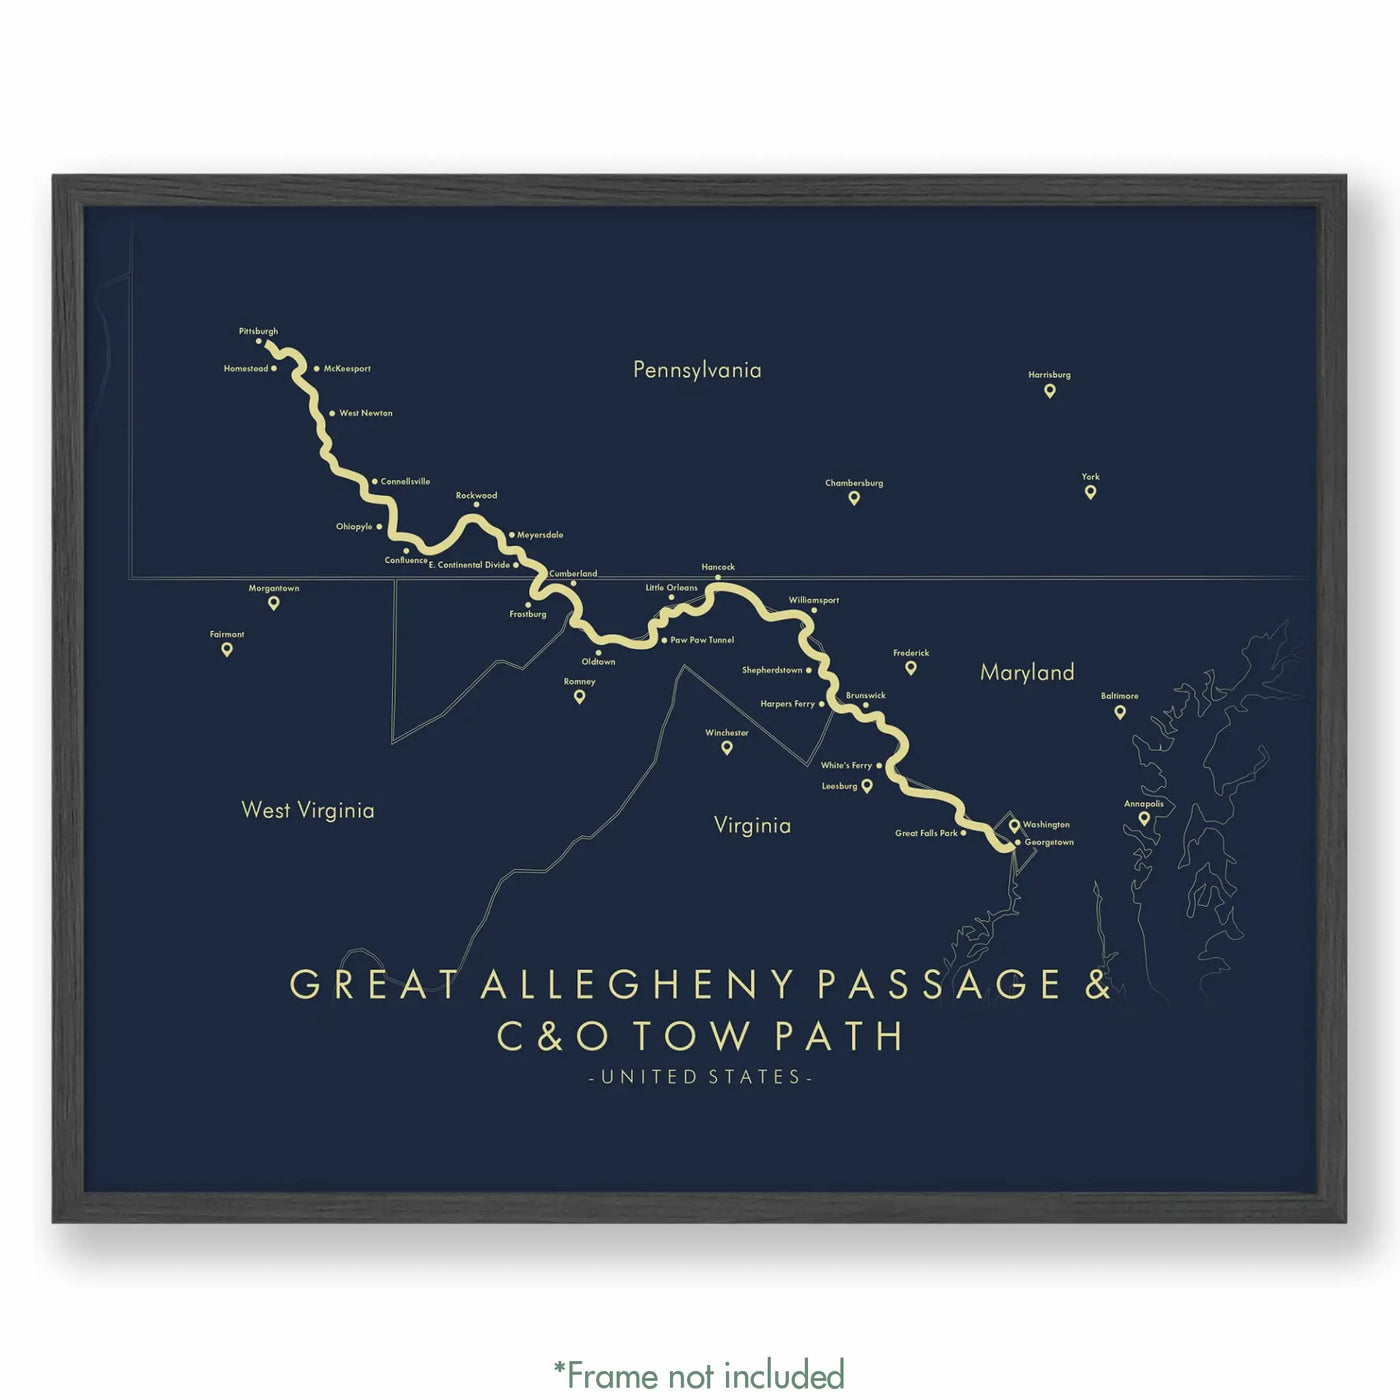 Trail Poster of Great Allegheny Passage & C&O Tow Path - Blue